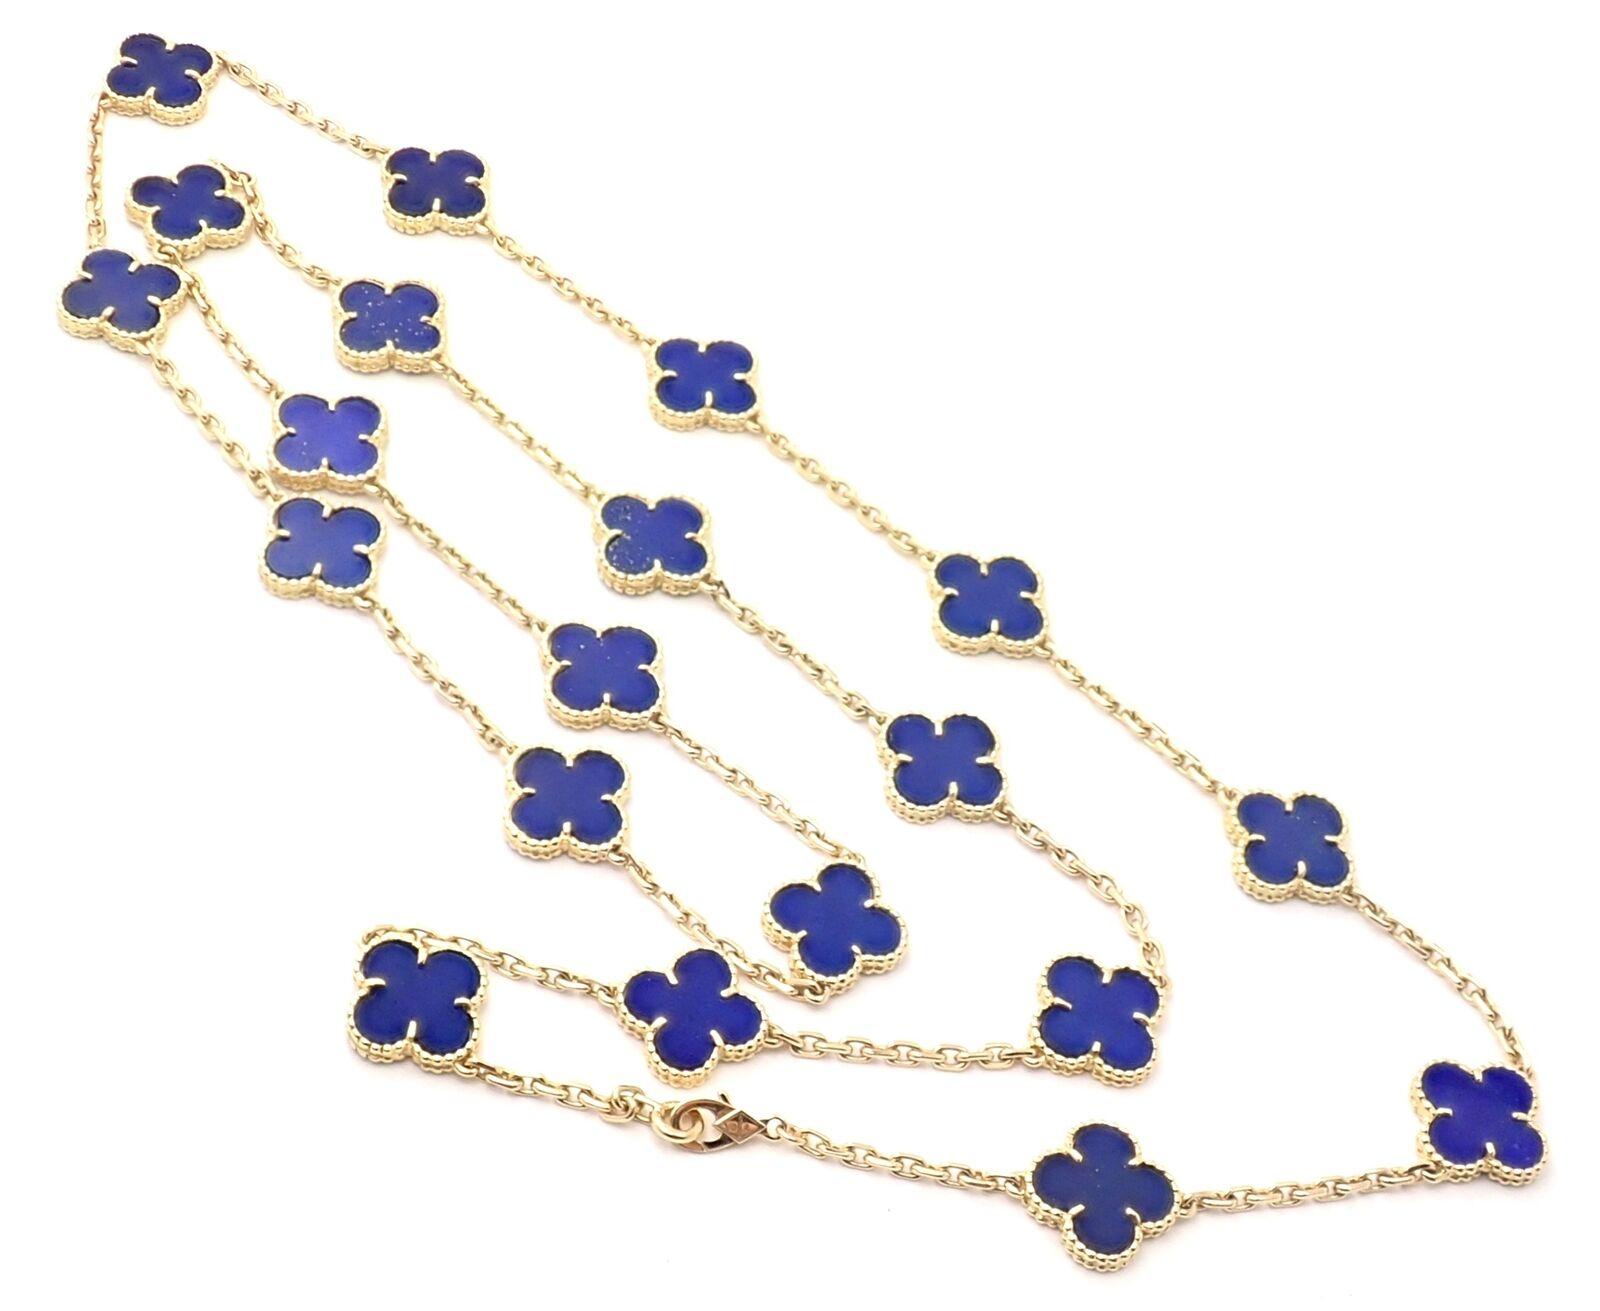 18k Yellow Gold Alhambra 20 Motifs Lapis Lazuli Necklace by 
Van Cleef & Arpels. 
With 20 motifs of Lapis Lazuli Alhambra shape stones 15mm each
*** This is an extremely rare, highly collectible lapis lazuli alhambra necklace by Van Cleef &